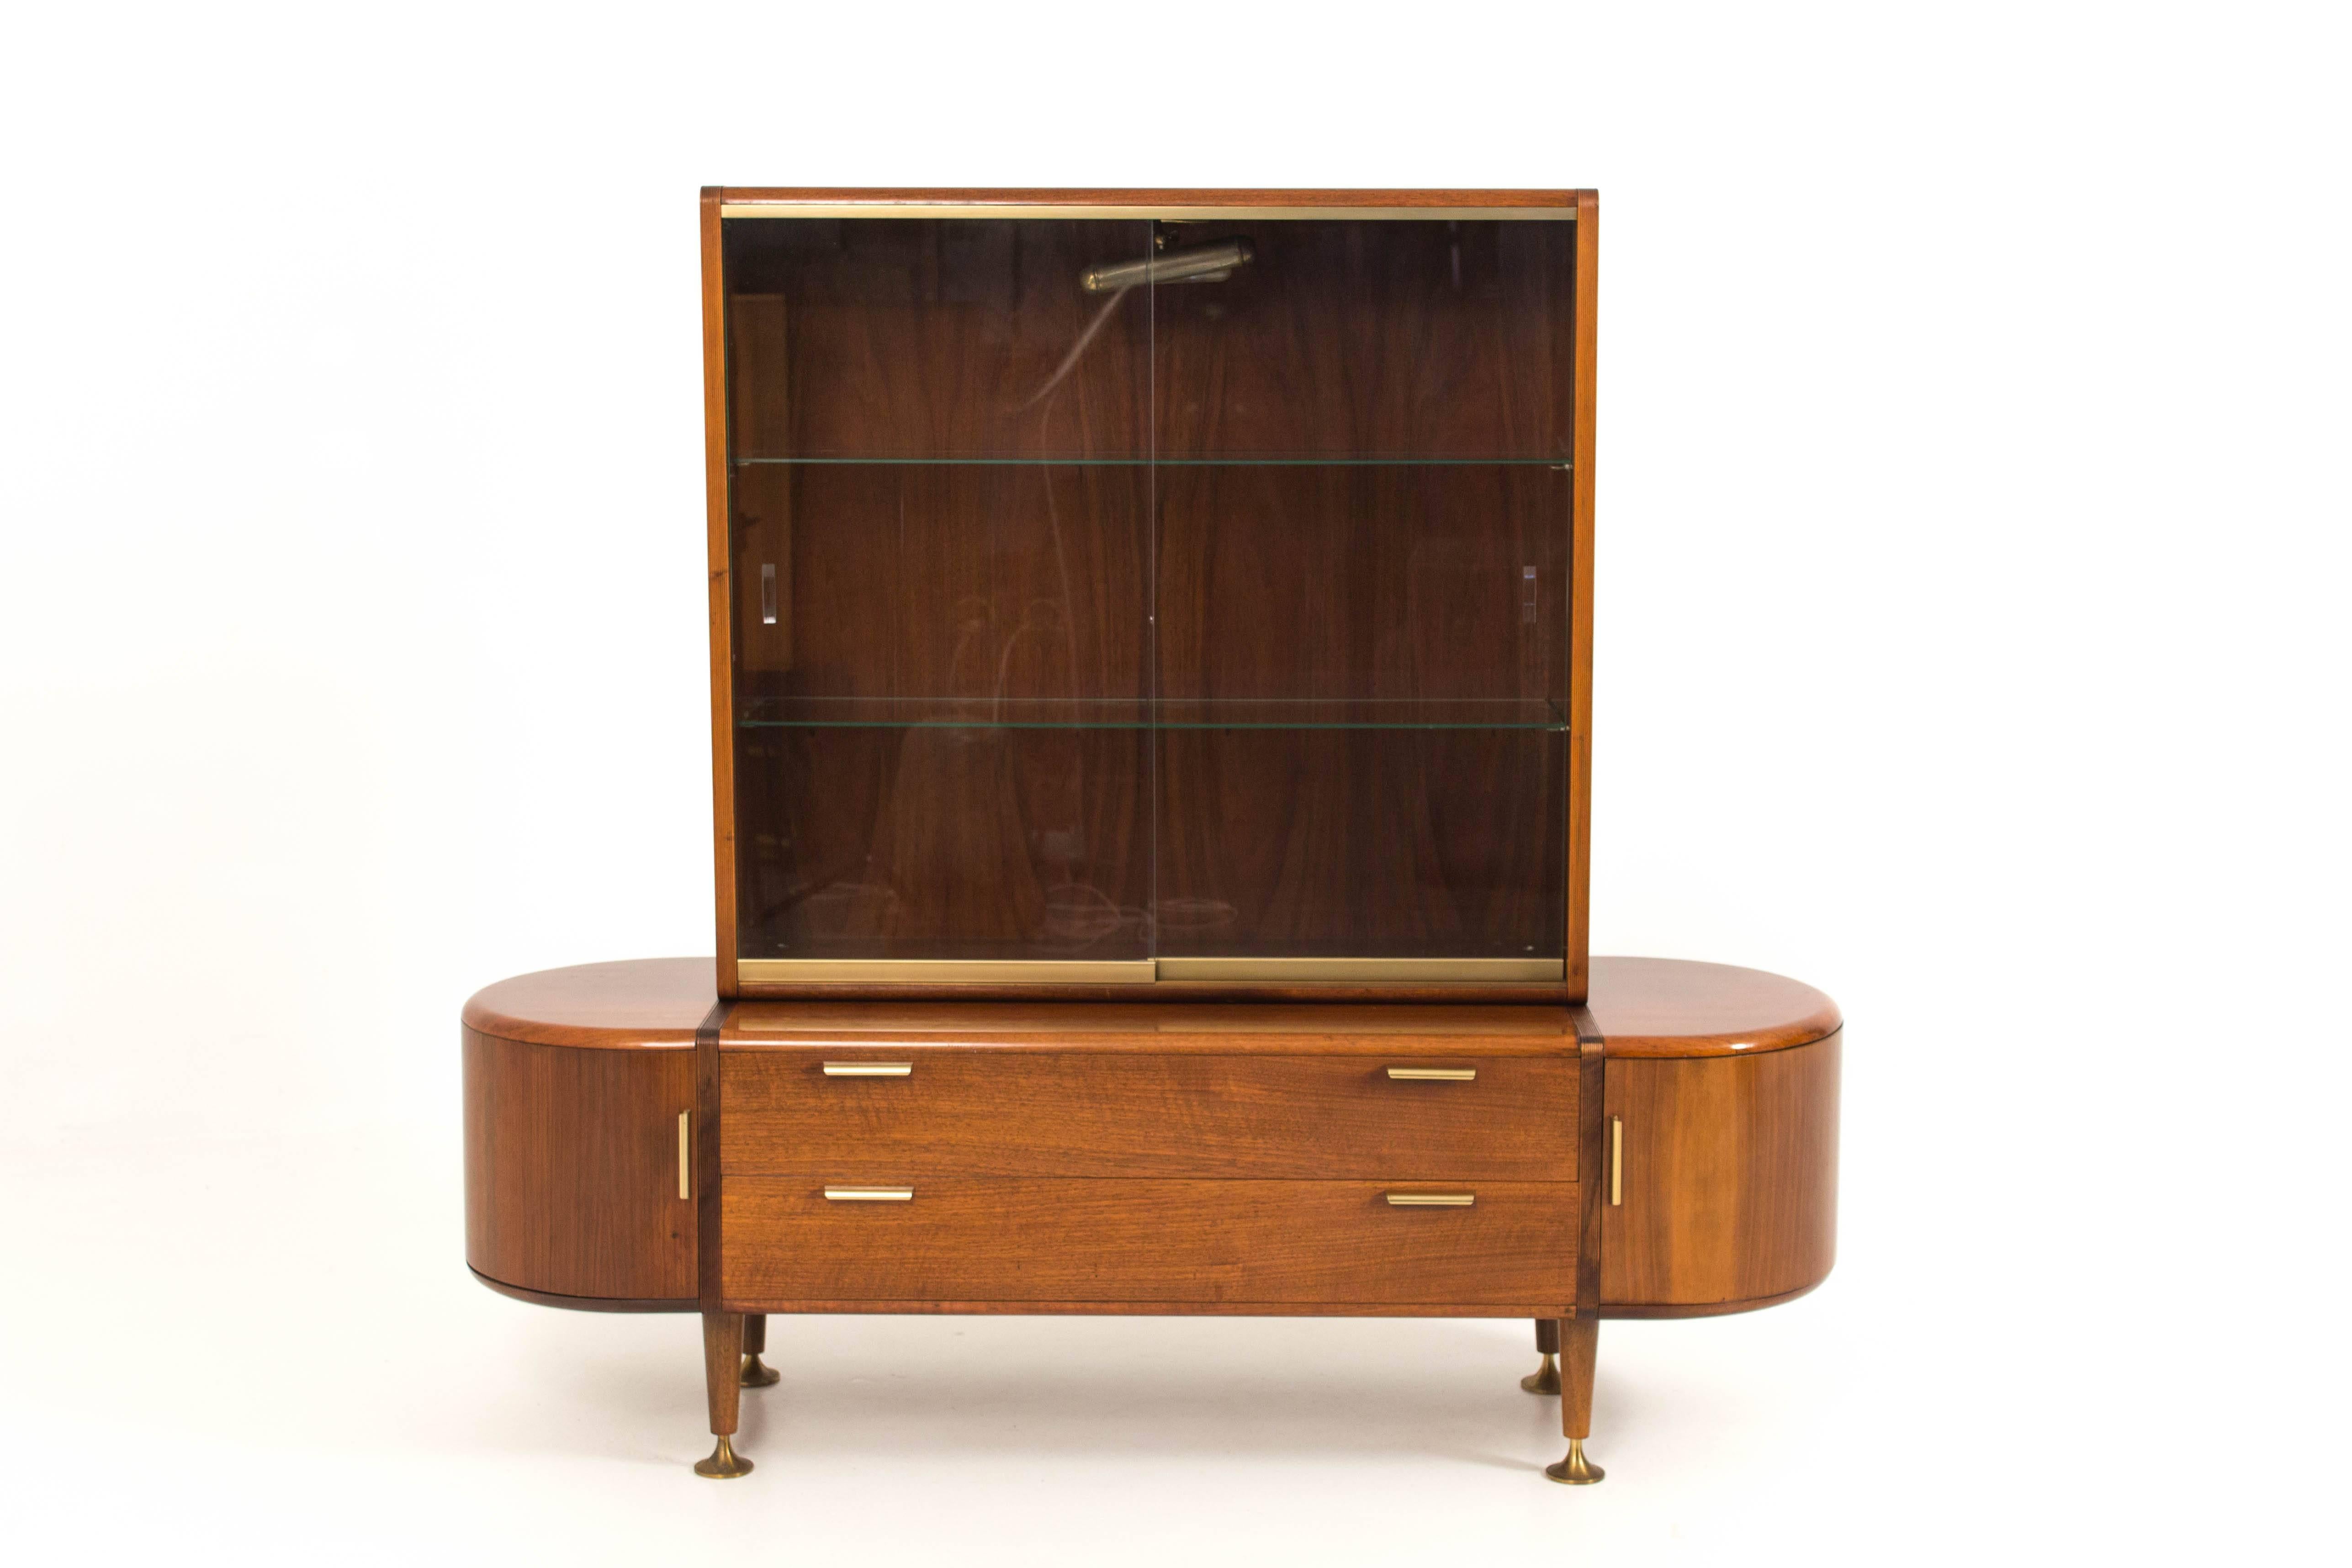 Stunning walnut Mid-Century Modern vitrine by A. A. Patijn for Poly-Z.
Original glass sliding doors.
Round bended doors and brass handles and feet.
In good original condition with minor wear consistent with age and use.
Preserving a beautiful